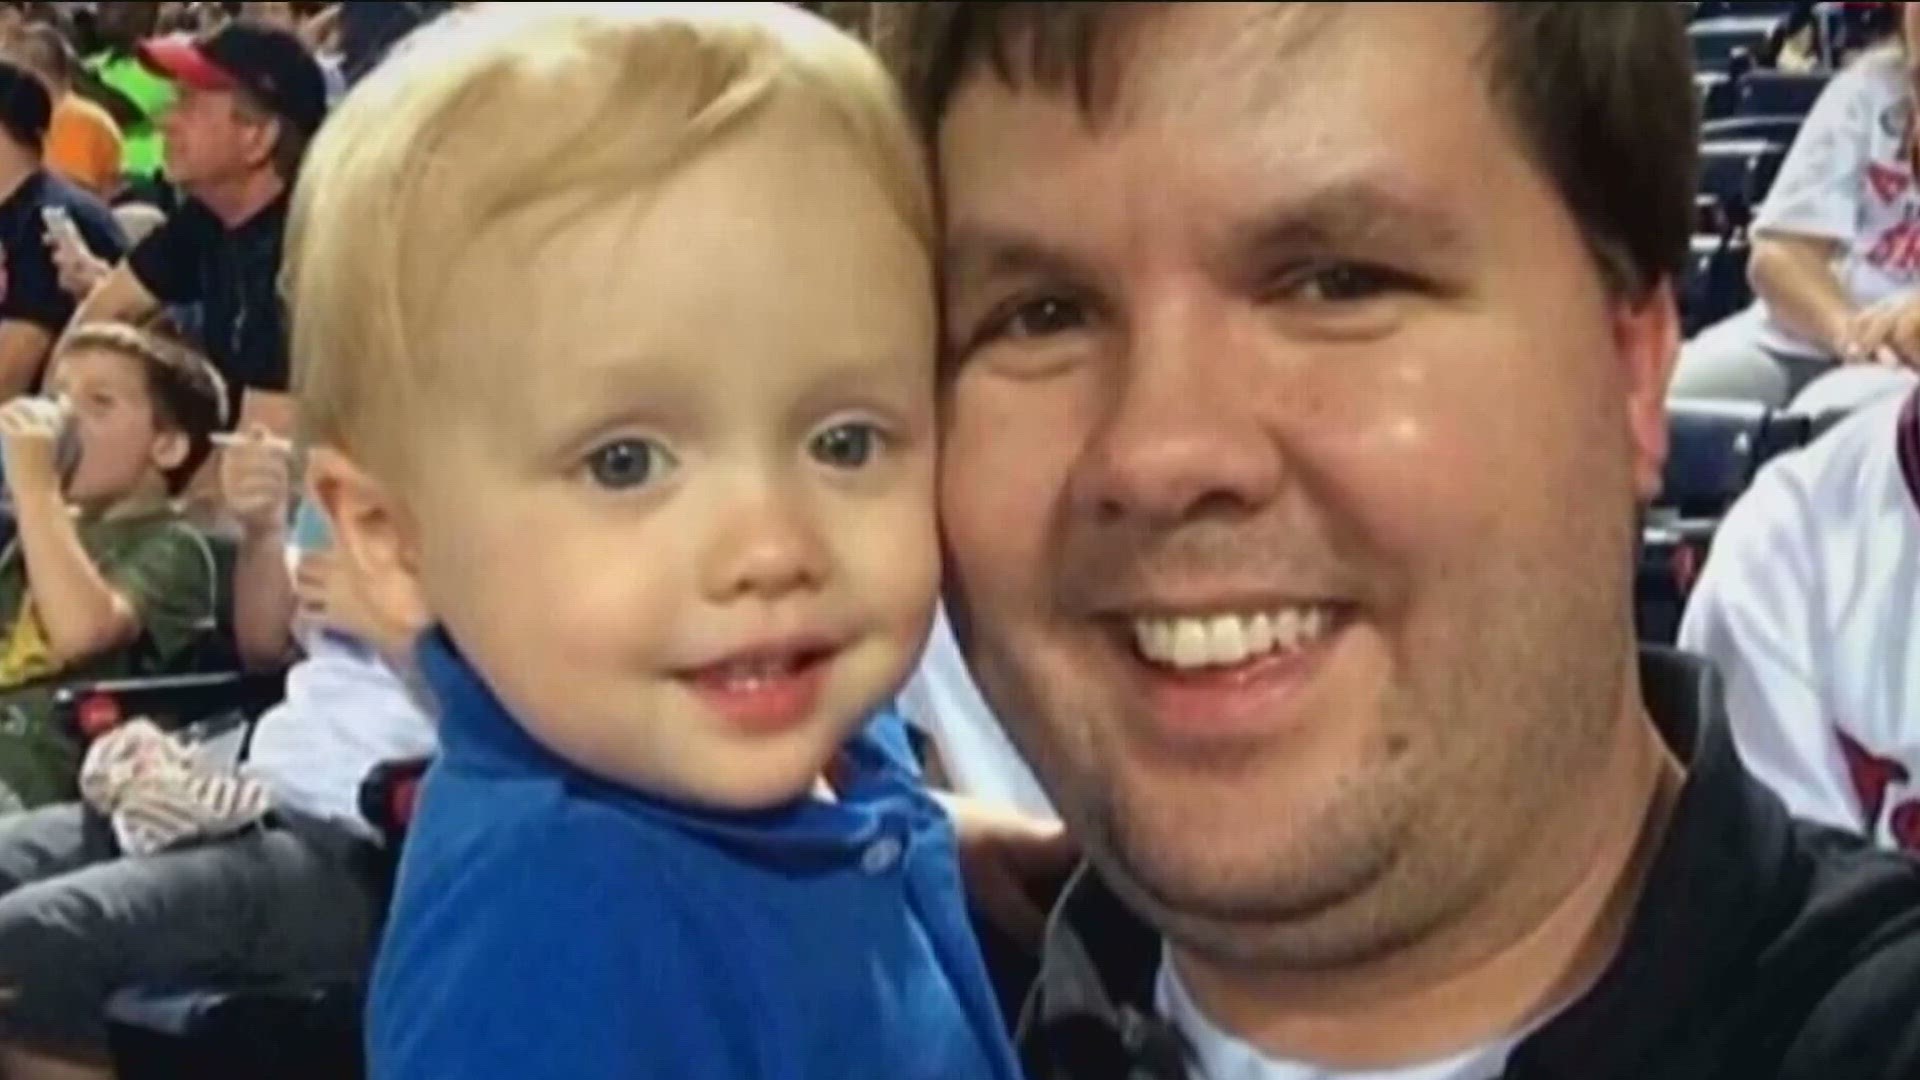 Justin Ross Harris, the man accused of leaving his toddler in a hot car back in 2014, will no longer be pursued by the Cobb County District Attorney’s Office.